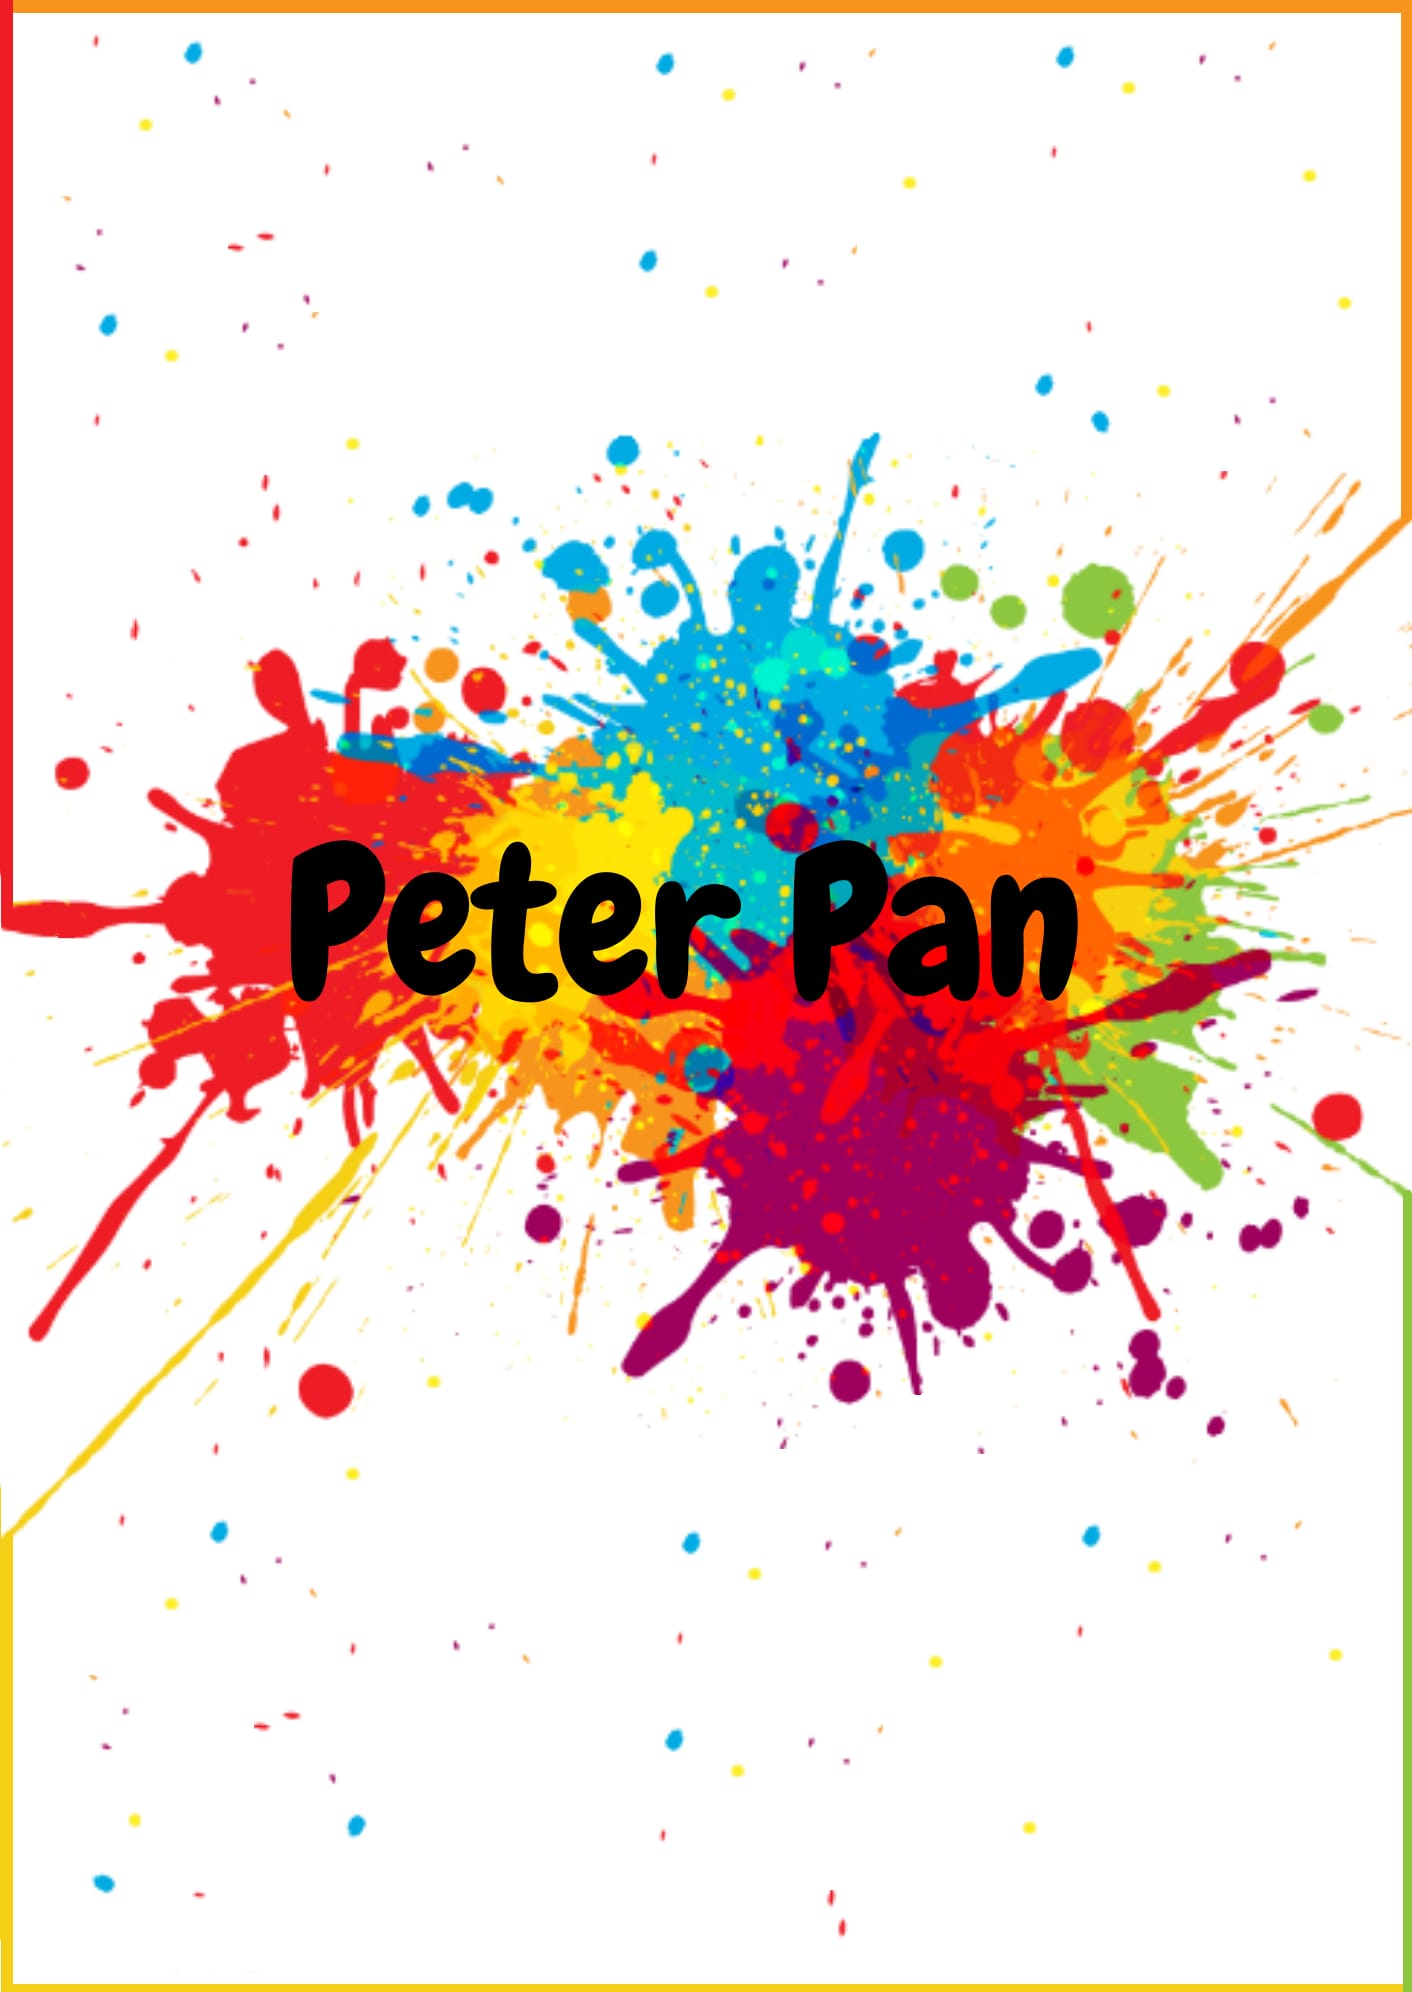 Affiche Peter-Pan vierge